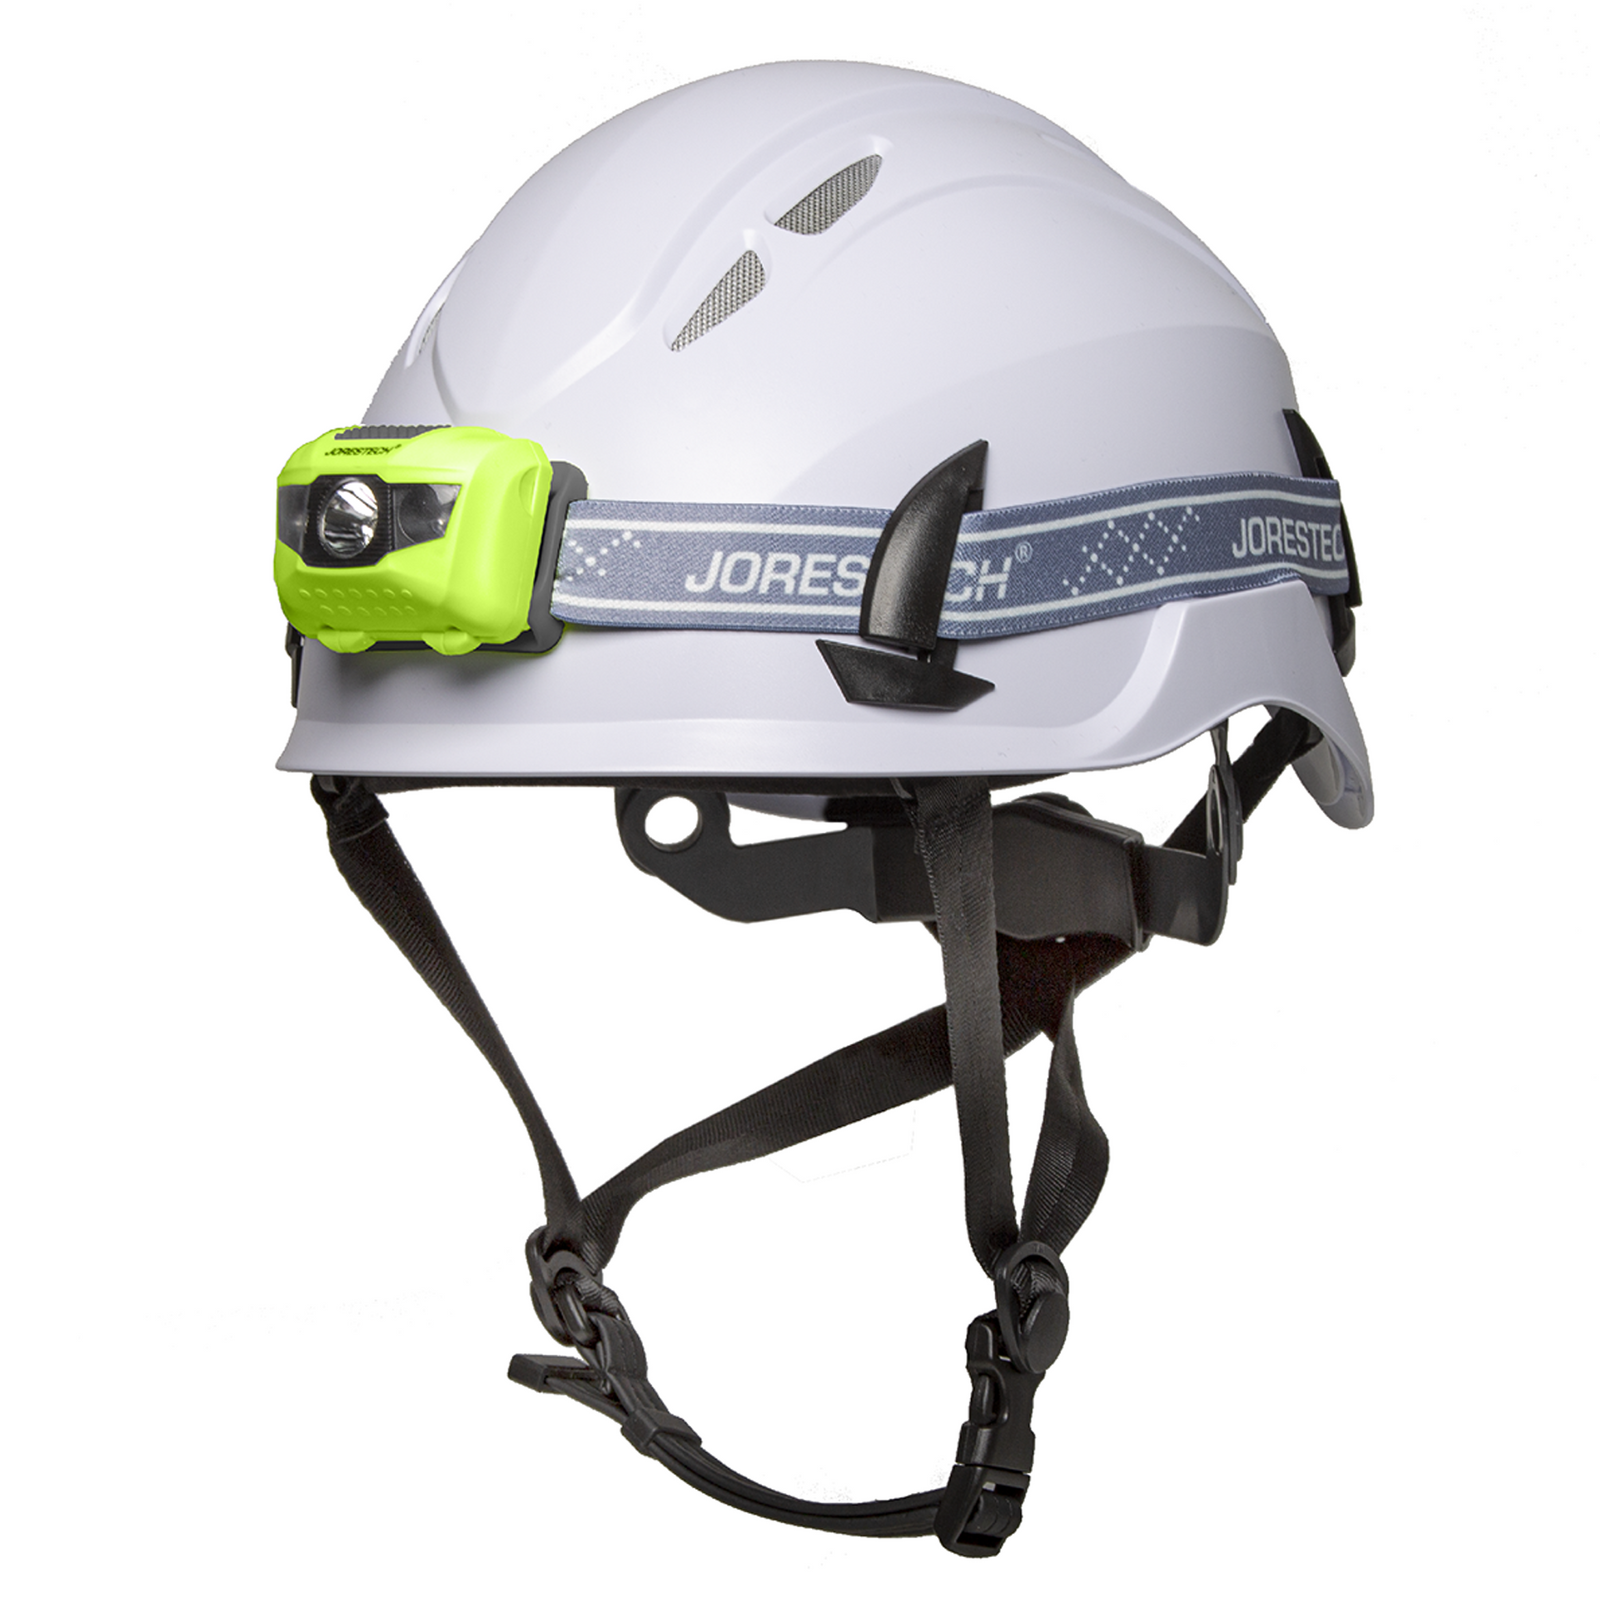 Diagonal view of a white ventilated hard hat Class 1 Type C with chin strap and a lime water resistant headlamp bundle